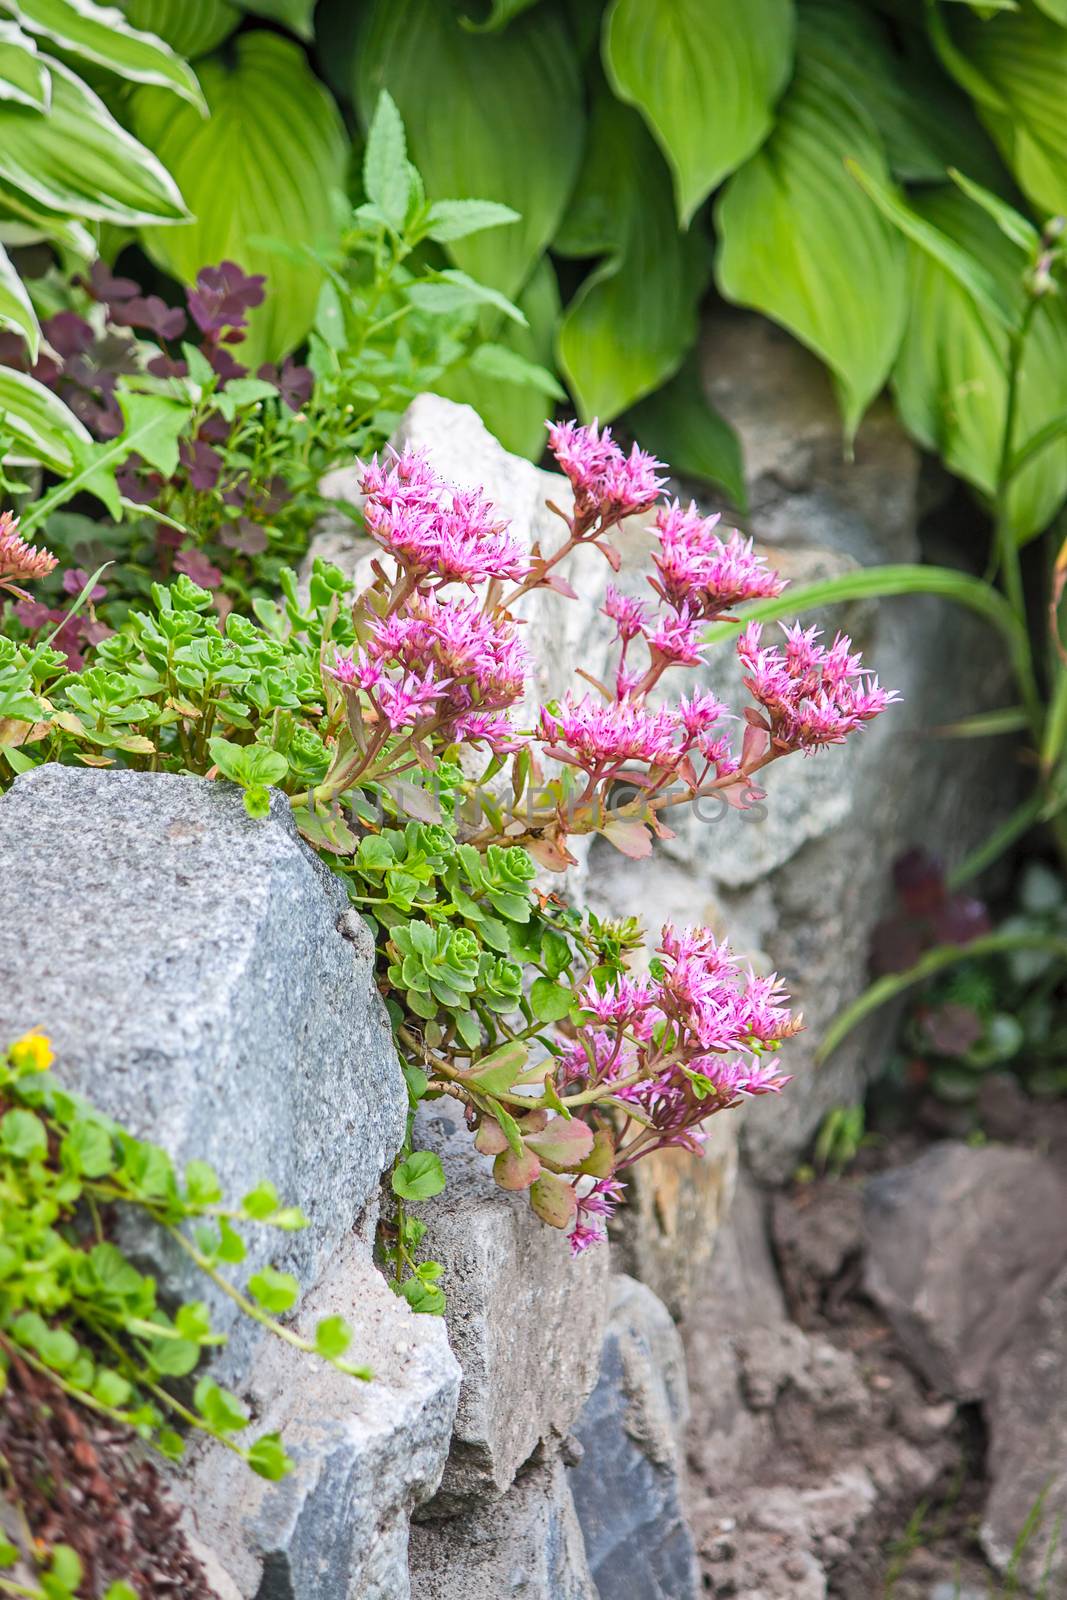 Sedum with flowers growing on the rocks in a corner of the garden.